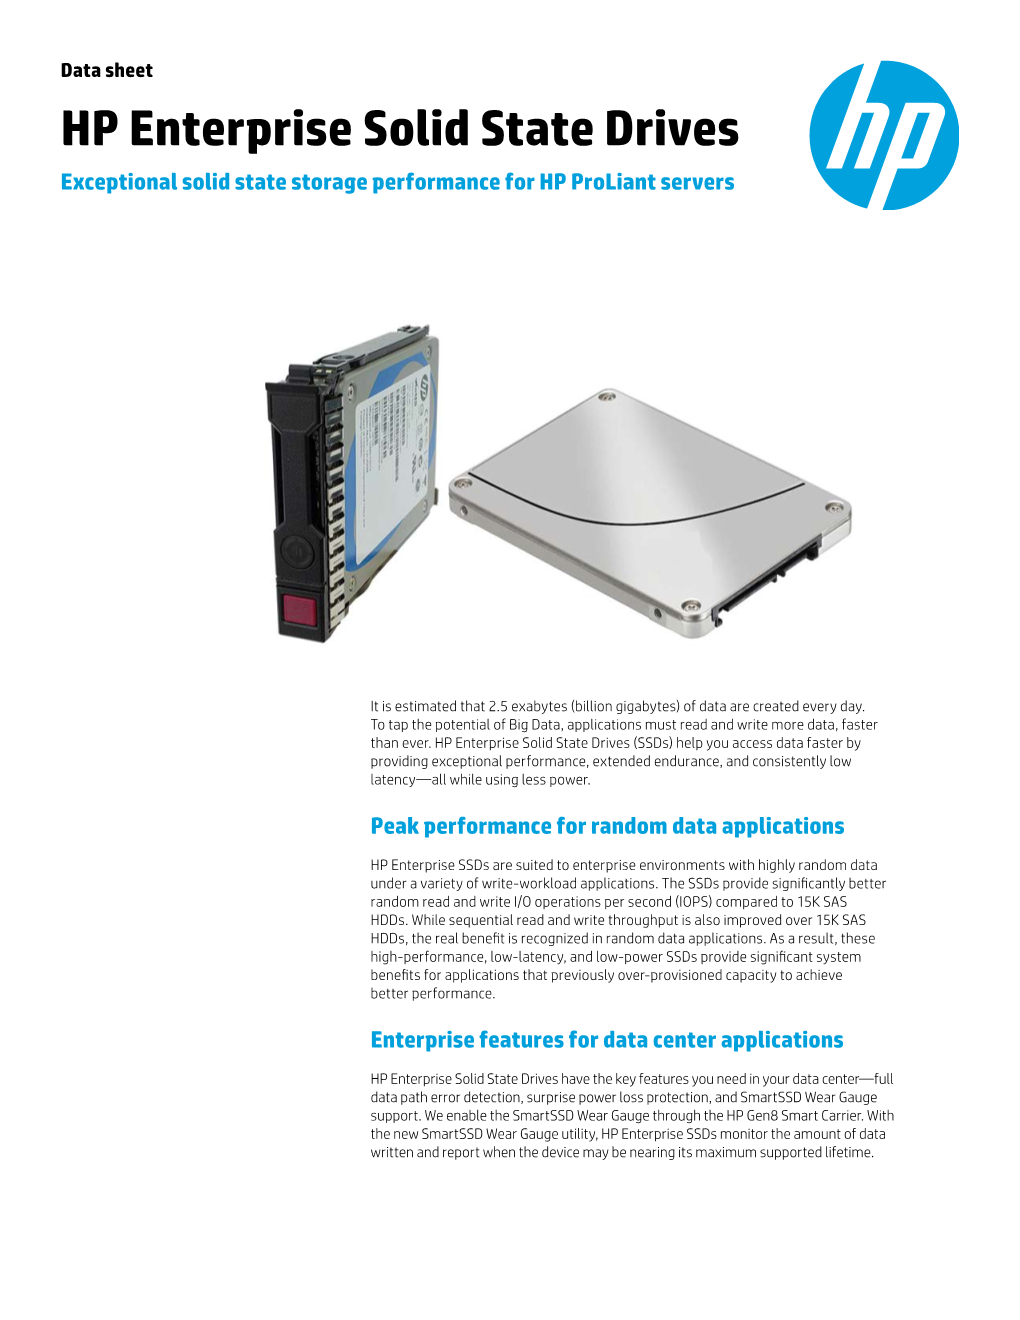 HP Enterprise Solid State Drives Exceptional Solid State Storage Performance for HP Proliant Servers